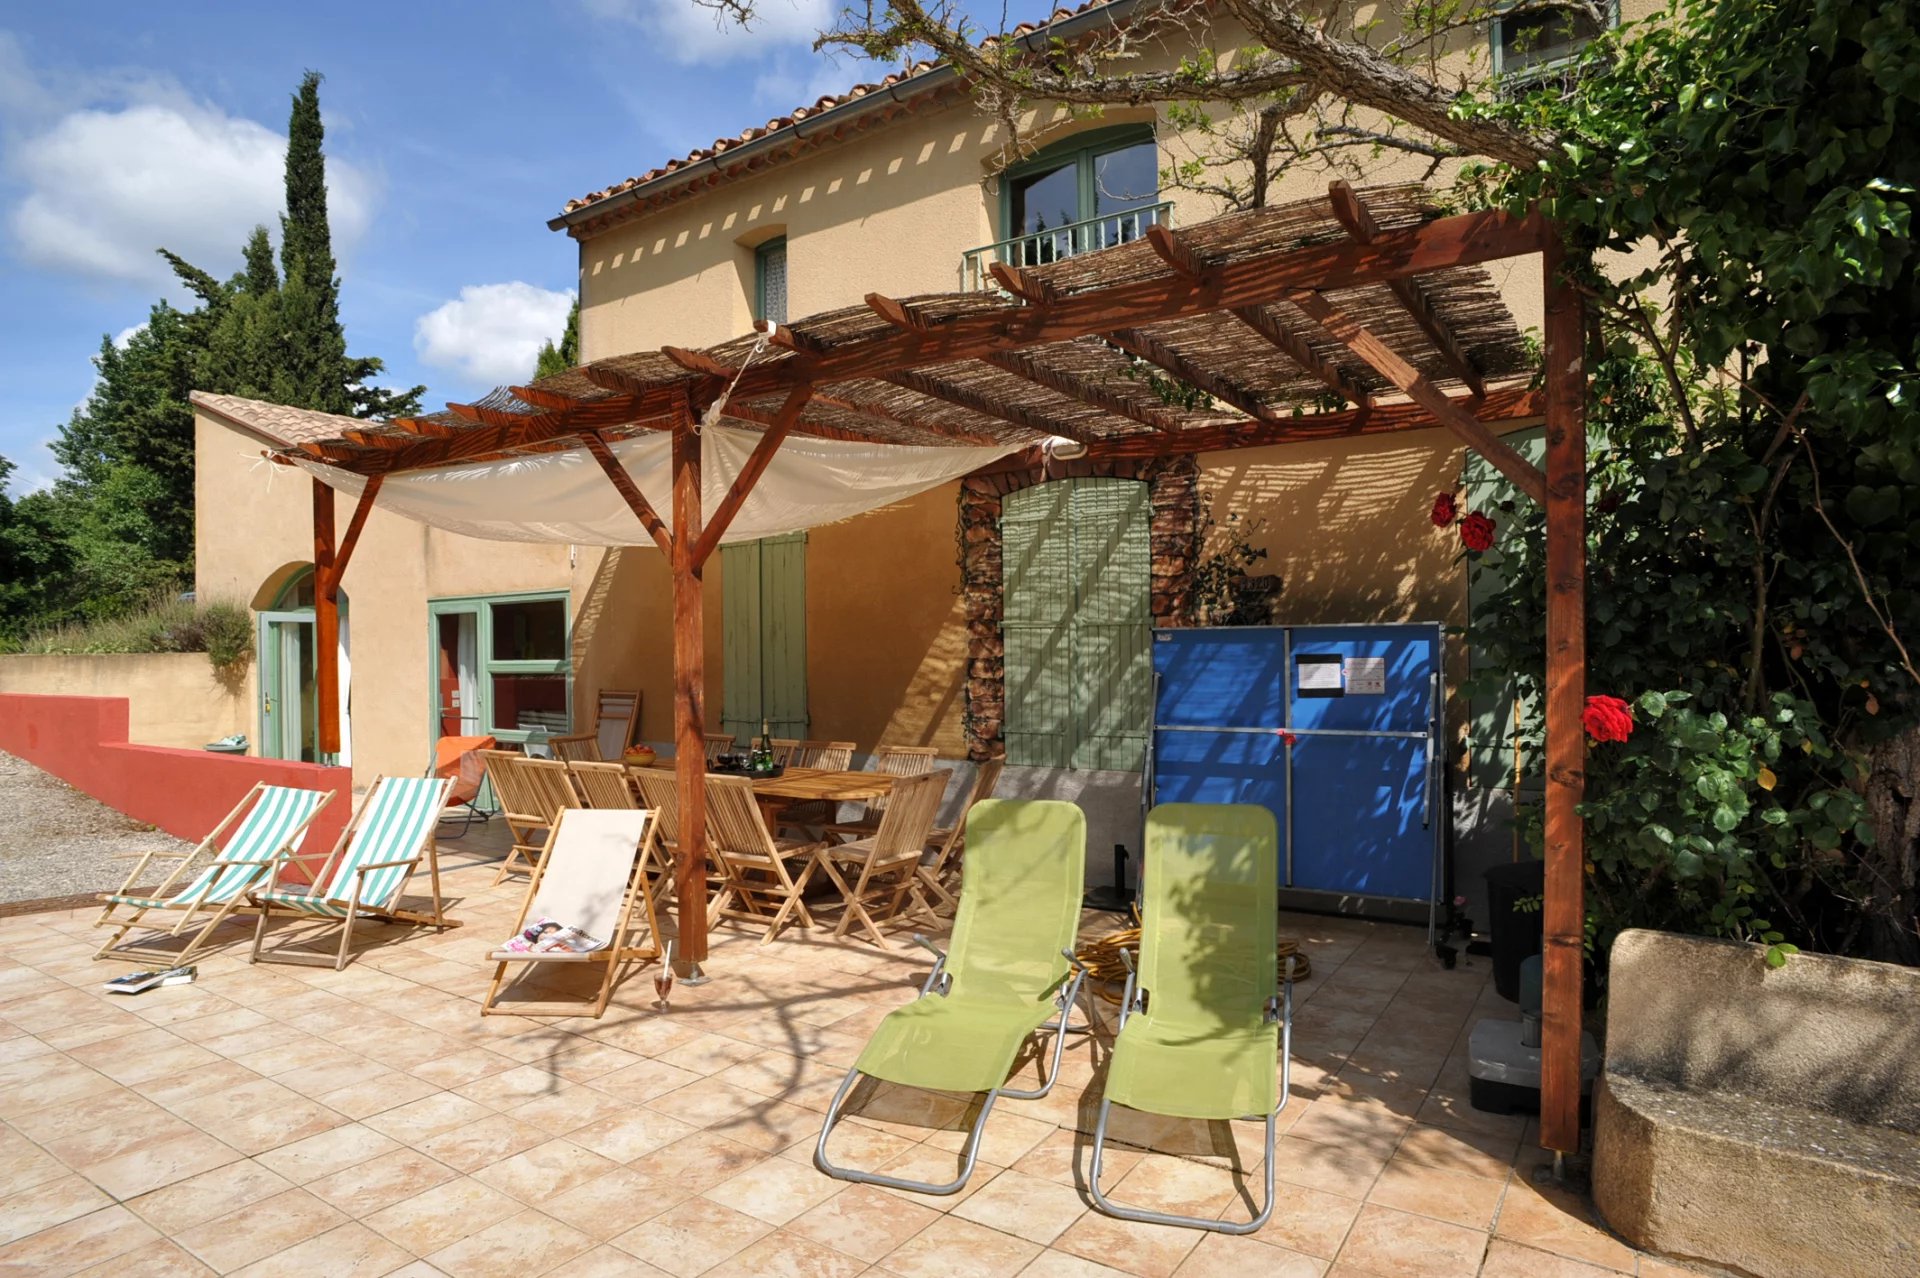 GITE WITH GARDEN, POOL AND LARGE GARAGE, ROUFFIAC DES CORBIERES